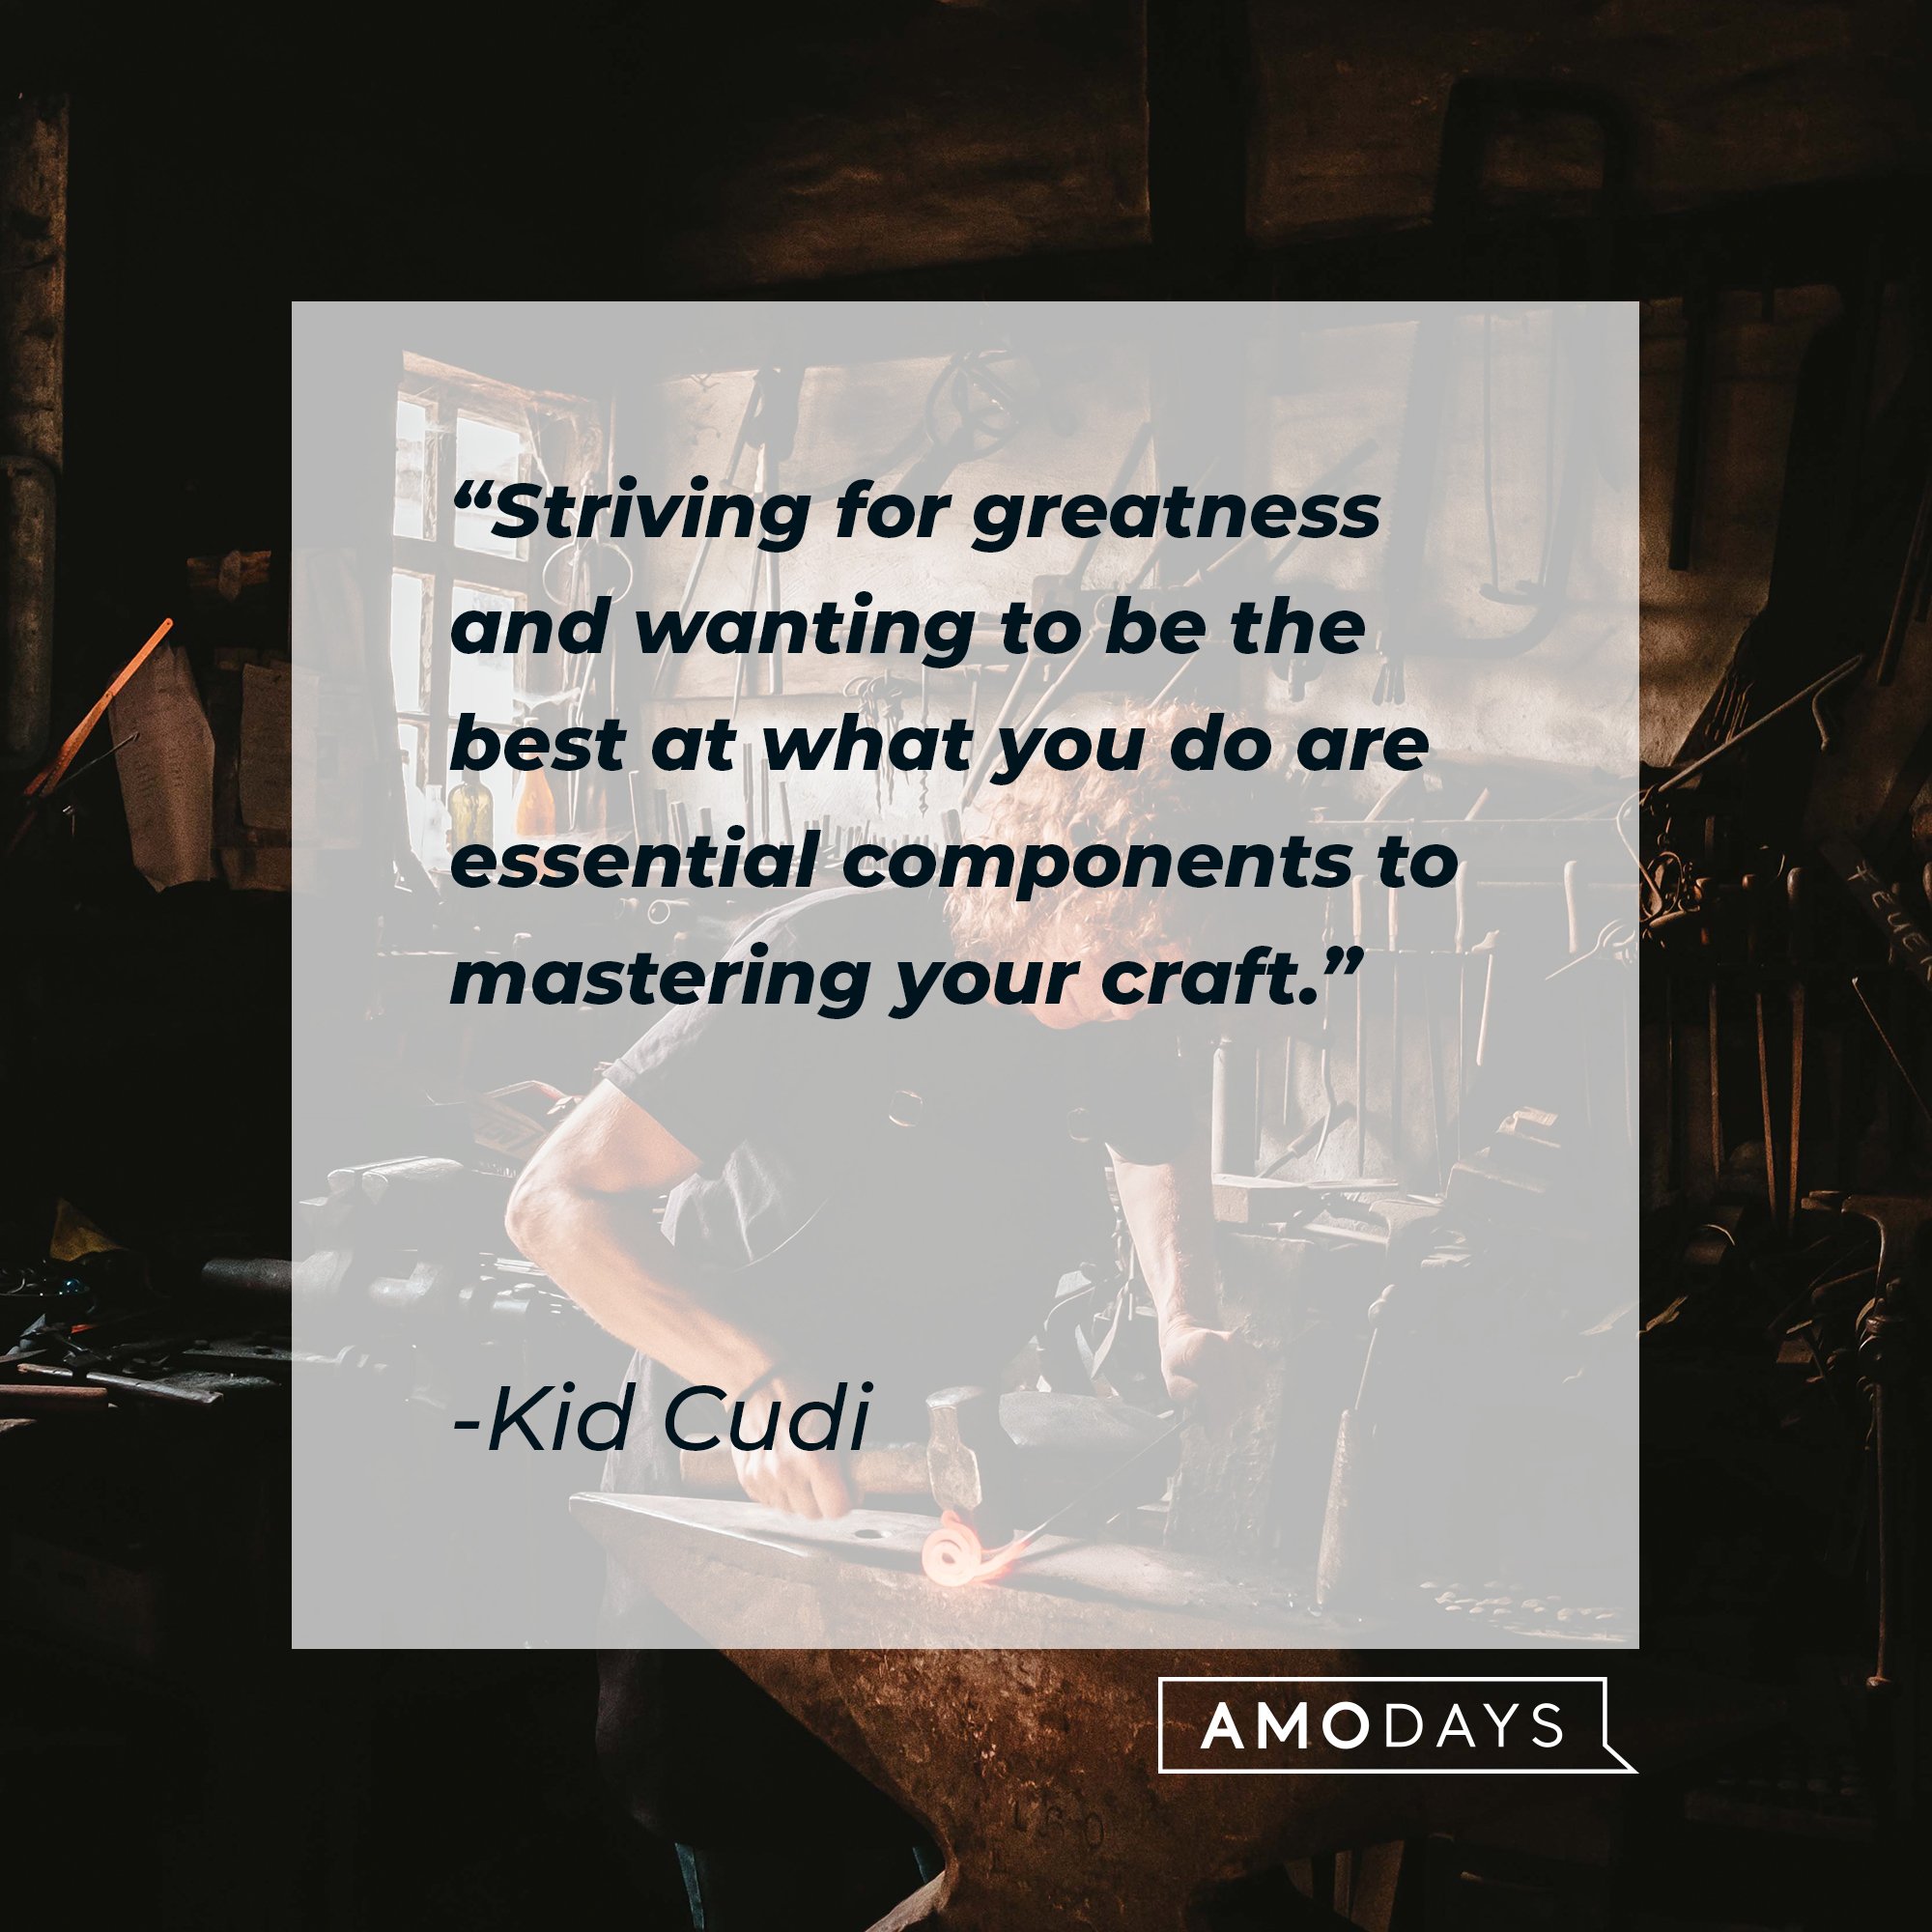 Kid Cudi’s quote: “Striving for greatness and wanting to be the best at what you do are essential components to mastering your craft.” | Image: AmoDays 